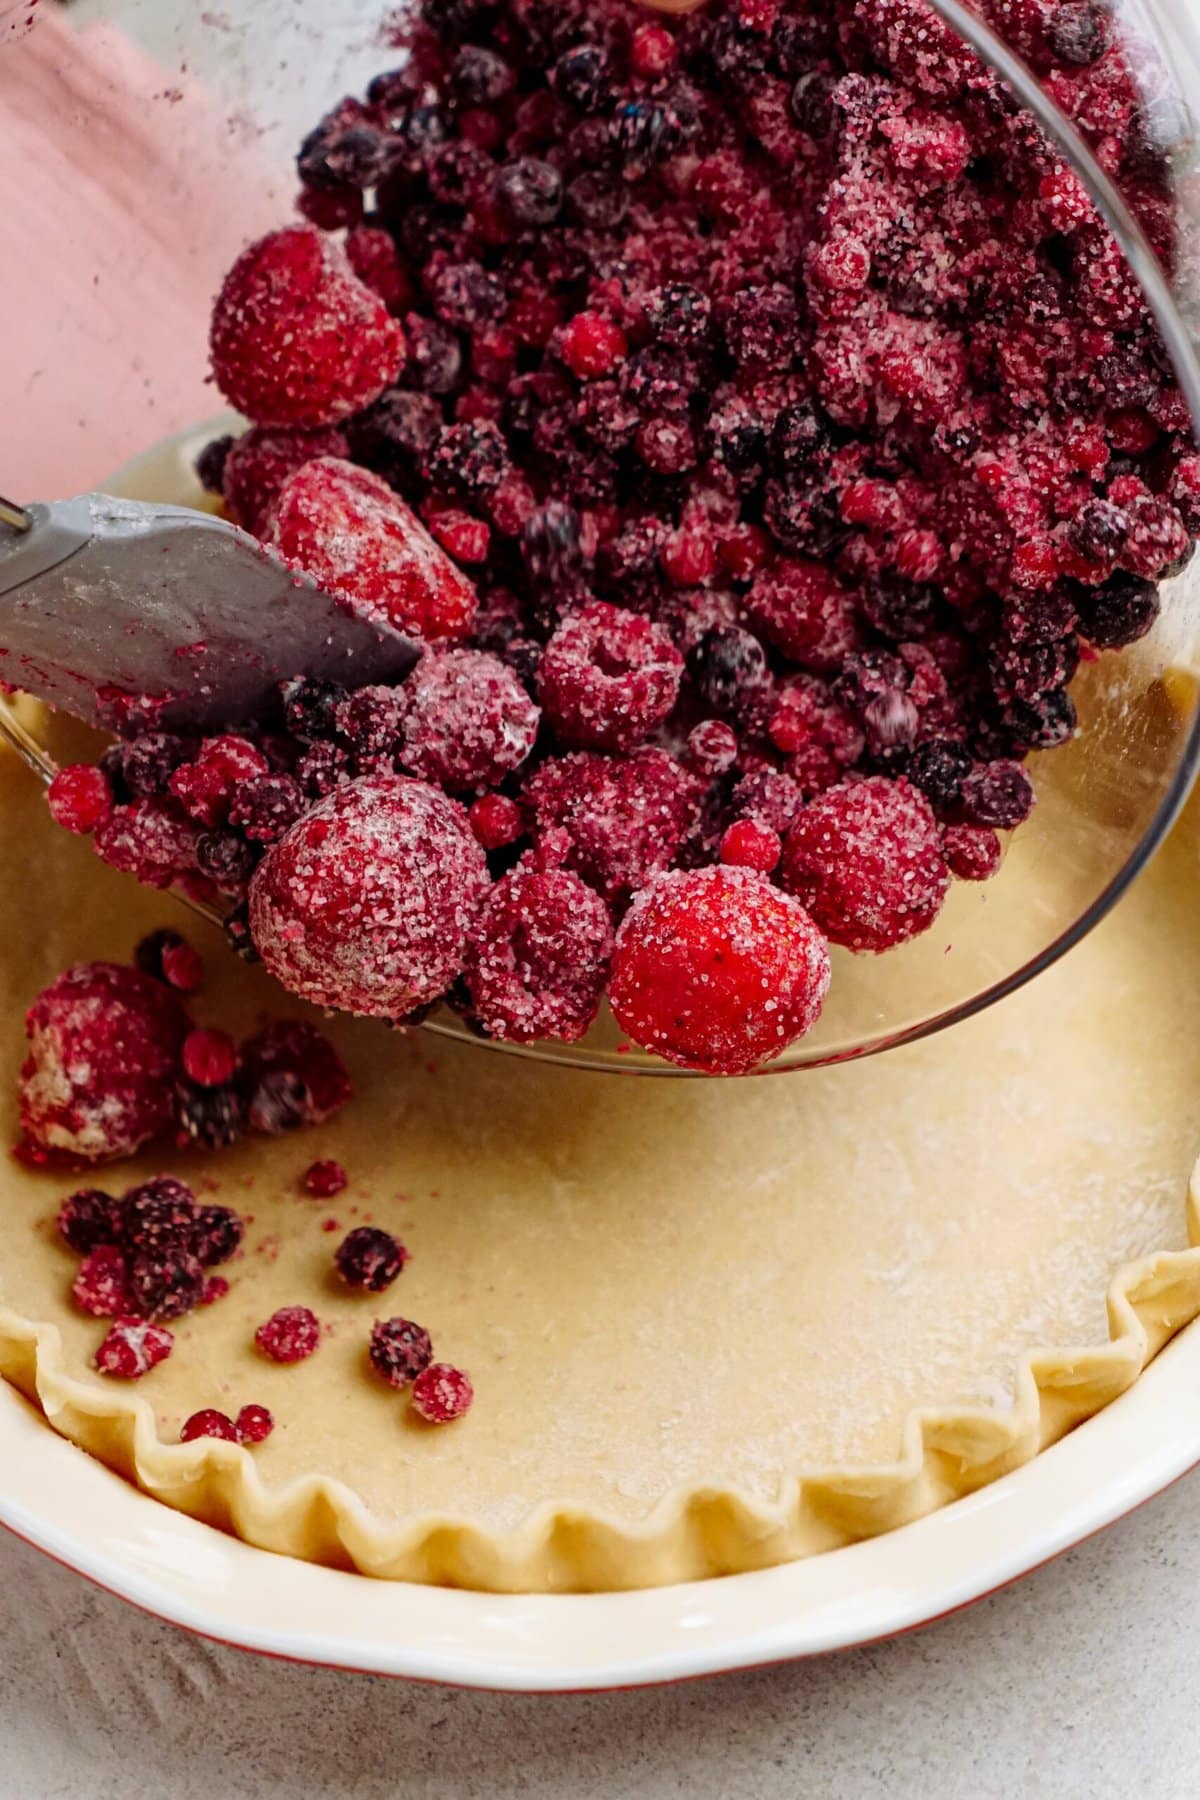 A mixture of frozen berries is being poured into an unbaked pie crust with a fluted edge, preparing to make a fruit pie.